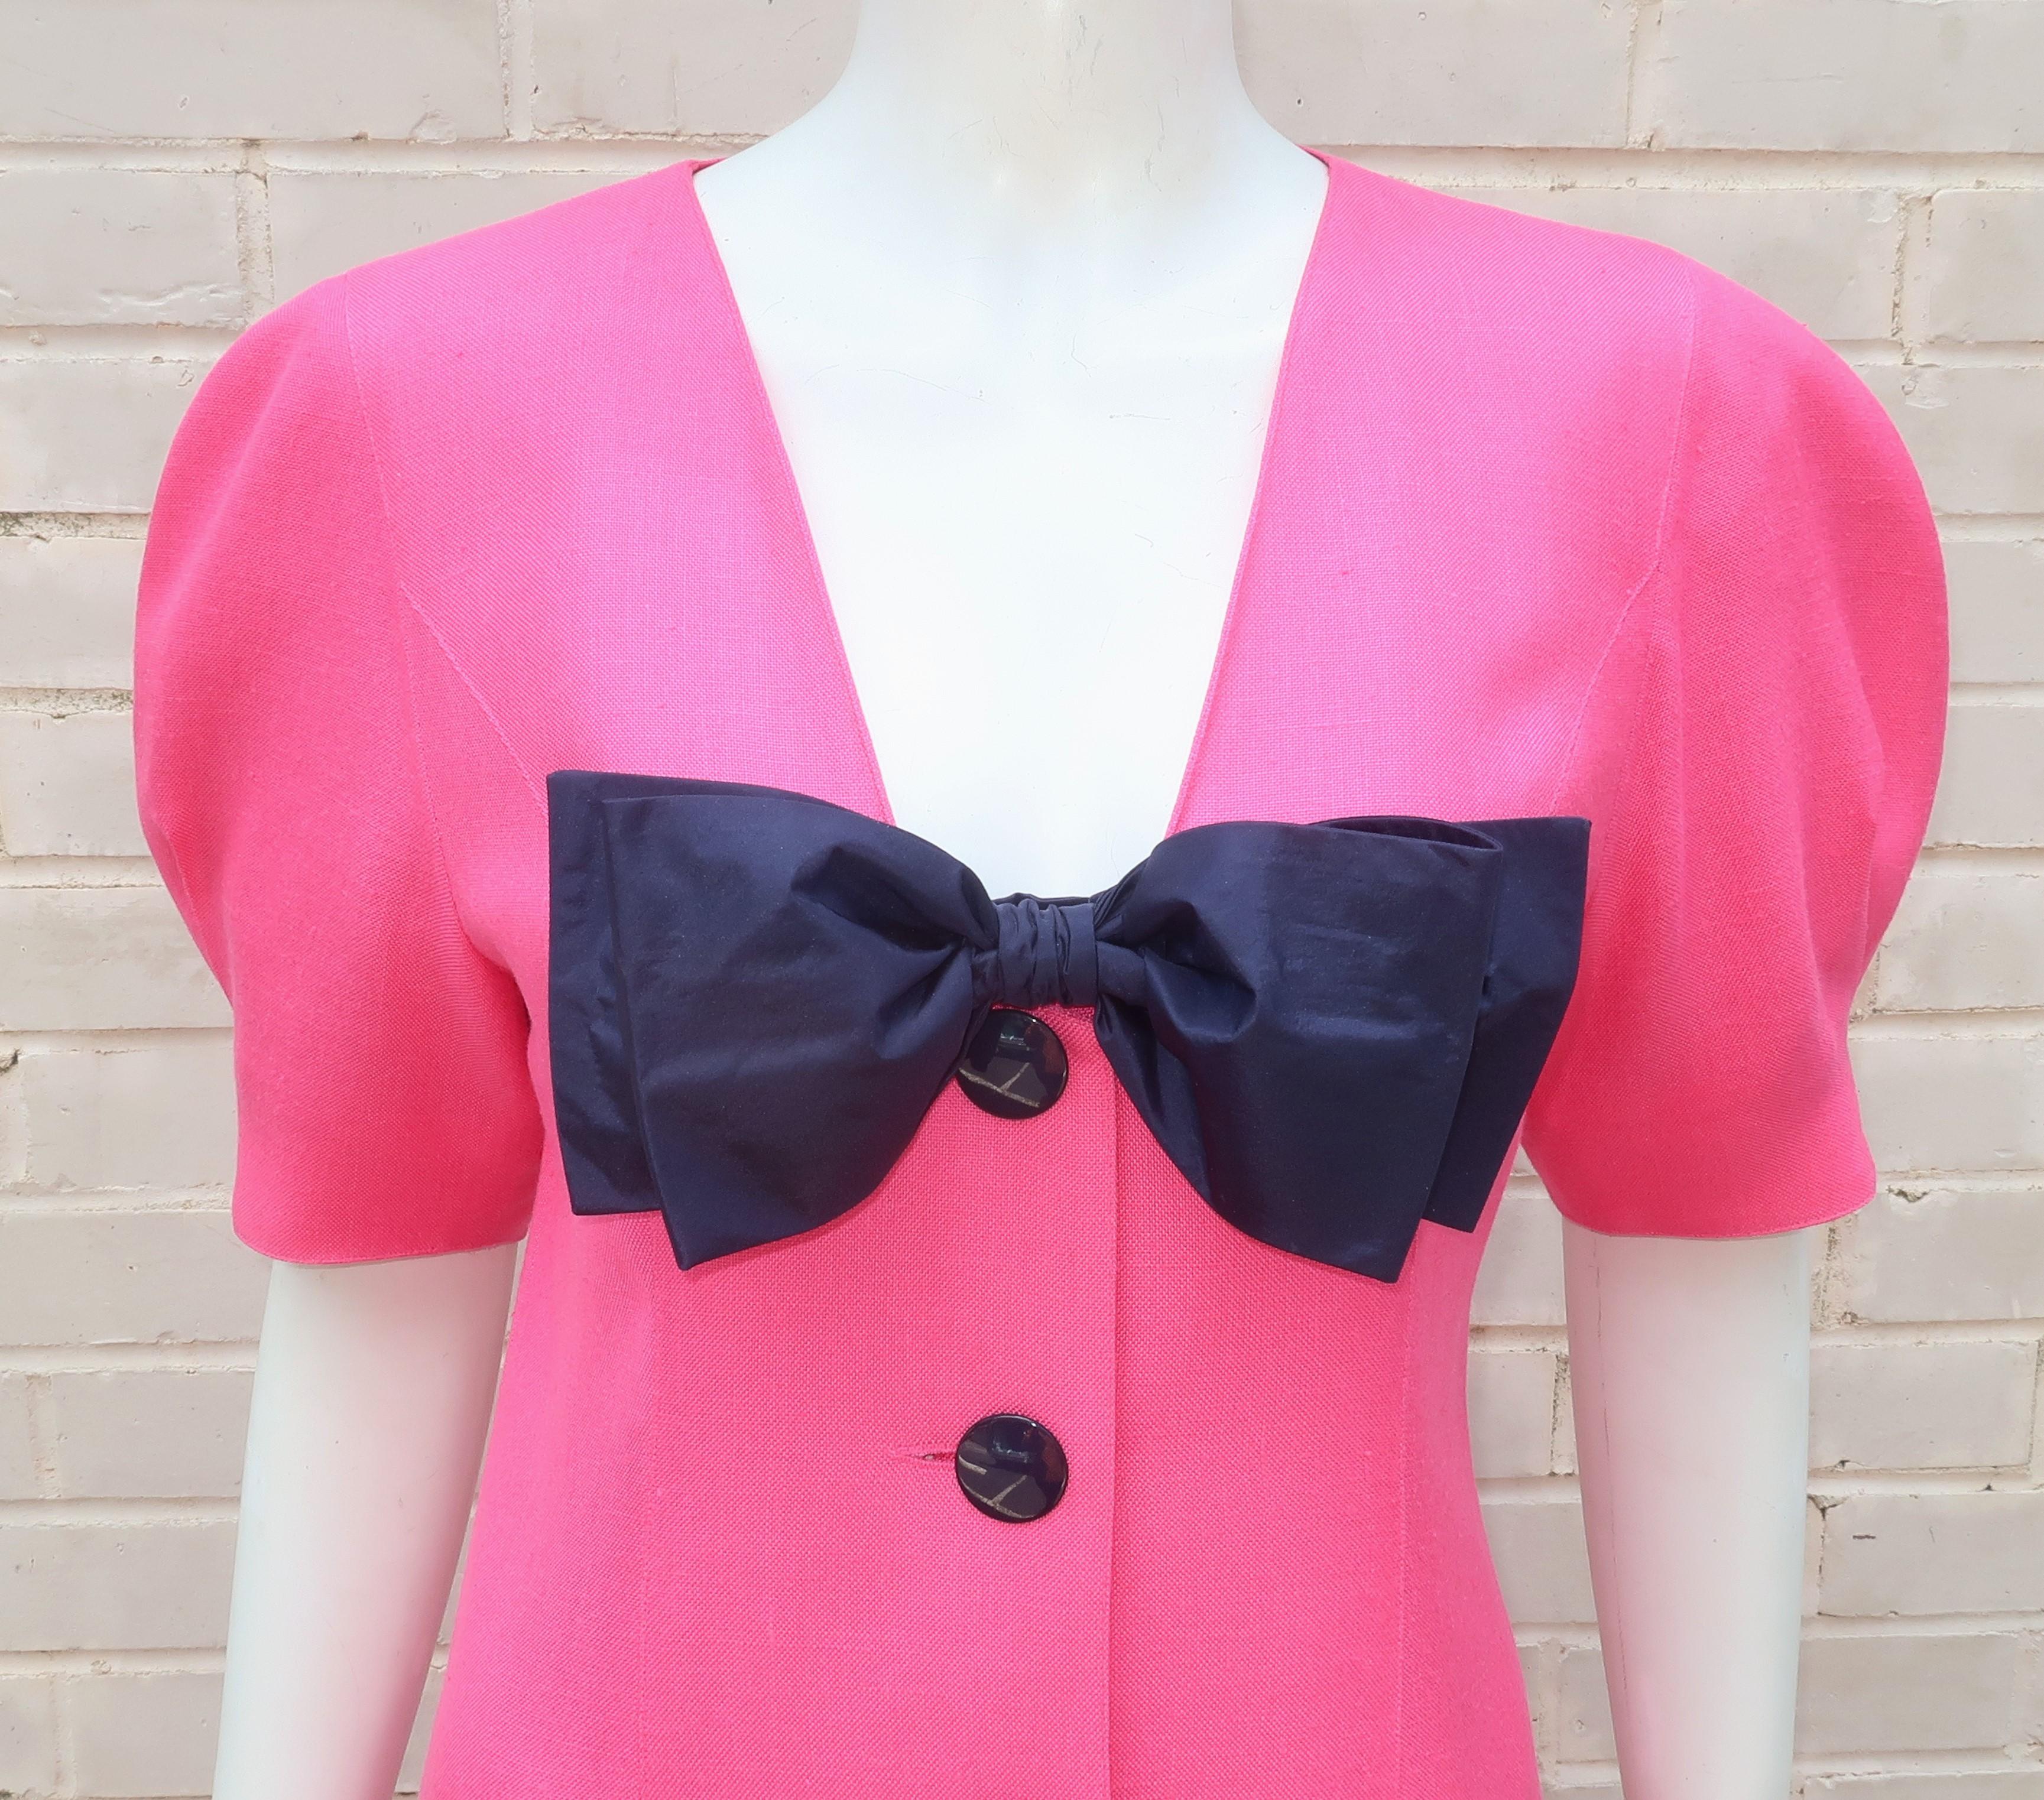 Guy Laroche puts a bow on it with this 1980's hot pink viscose rayon dress with the look and feel of nubby linen accented with a removable blue taffeta bow. The dress buttons down the front with a row of shiny blue buttons and sports short sleeves